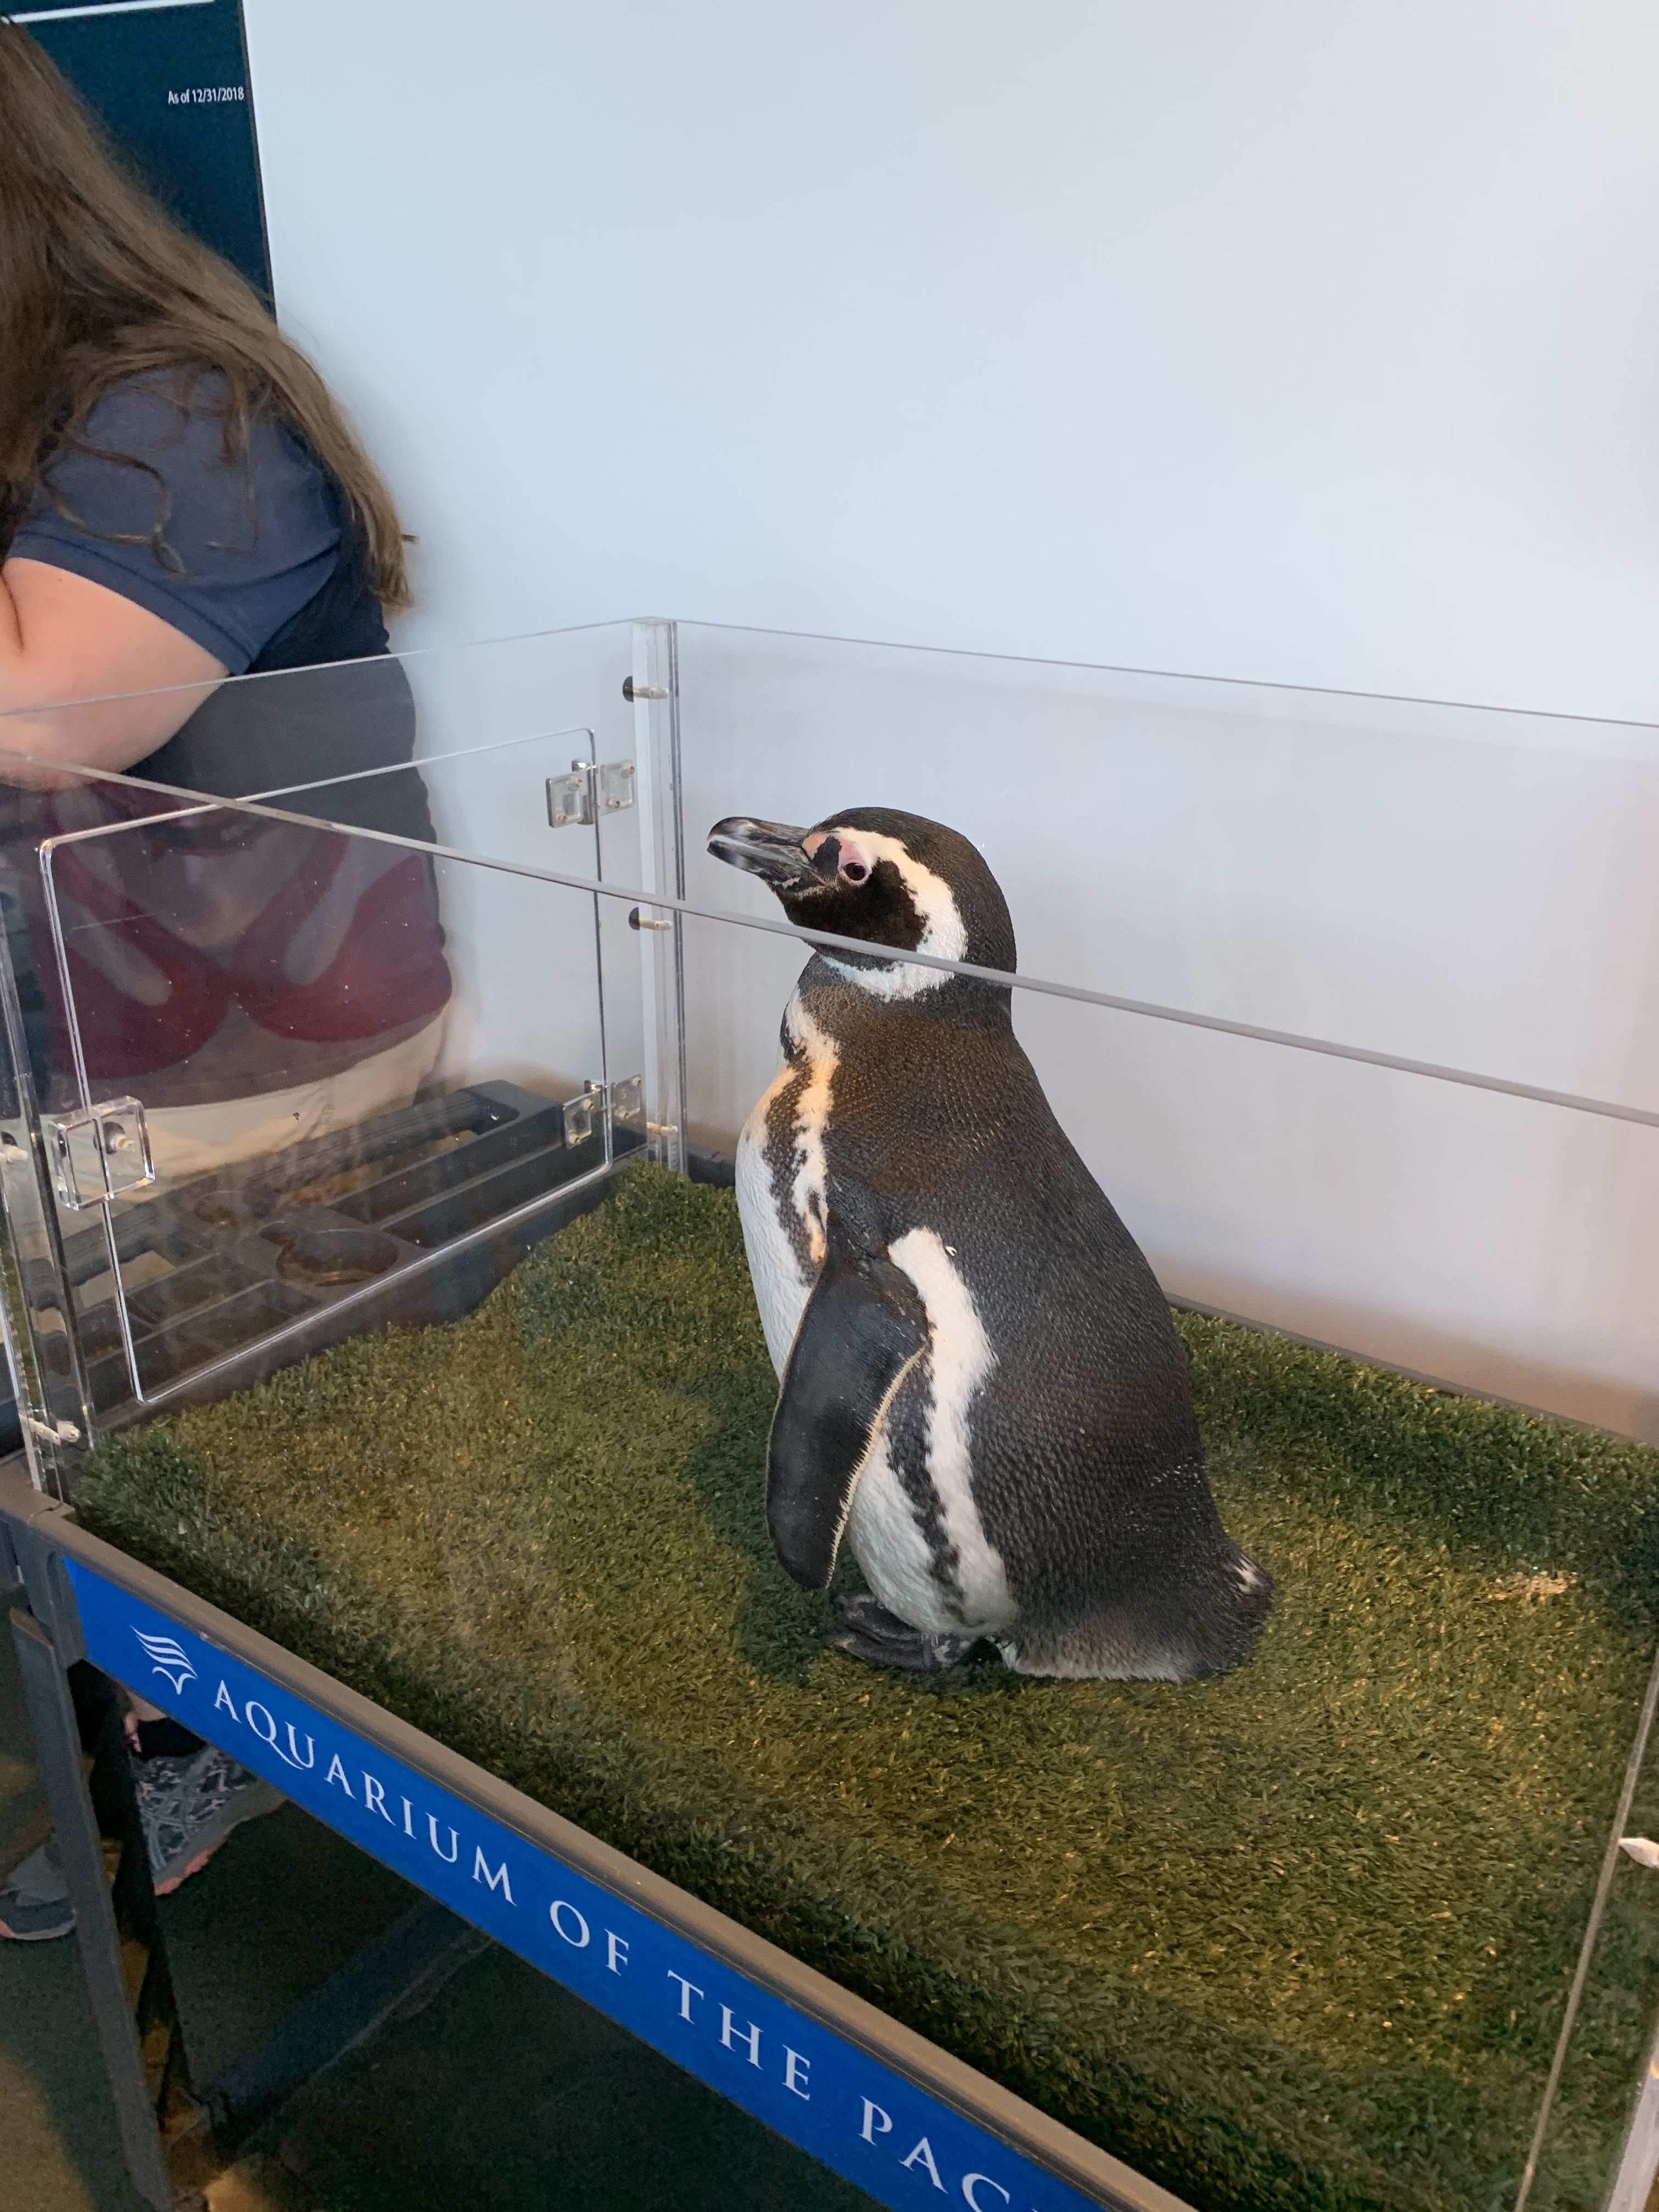 Penguin stands on small cart at Aquarium of the Pacific